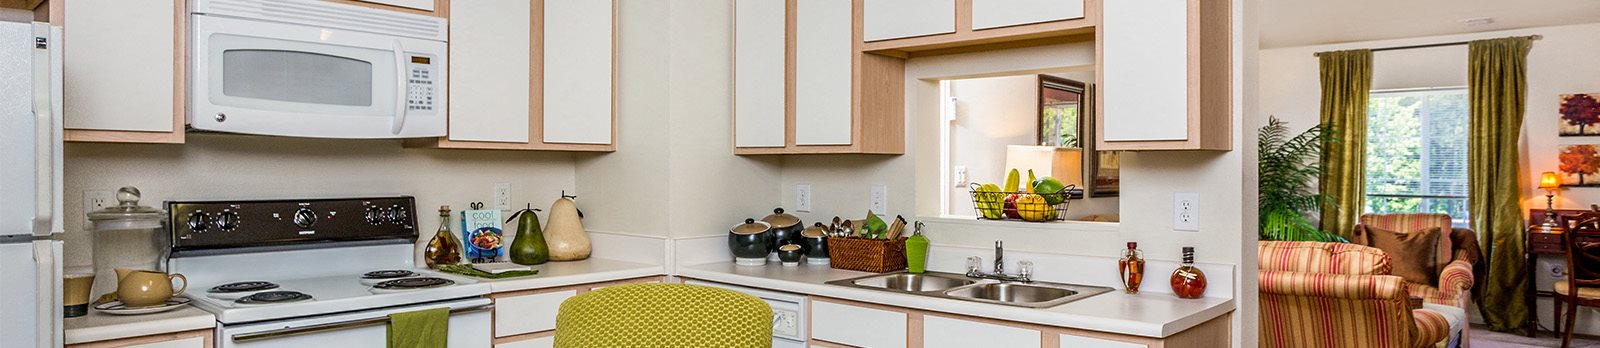 Built-In Microwaves at Featherstone Village Apartments, North Carolina